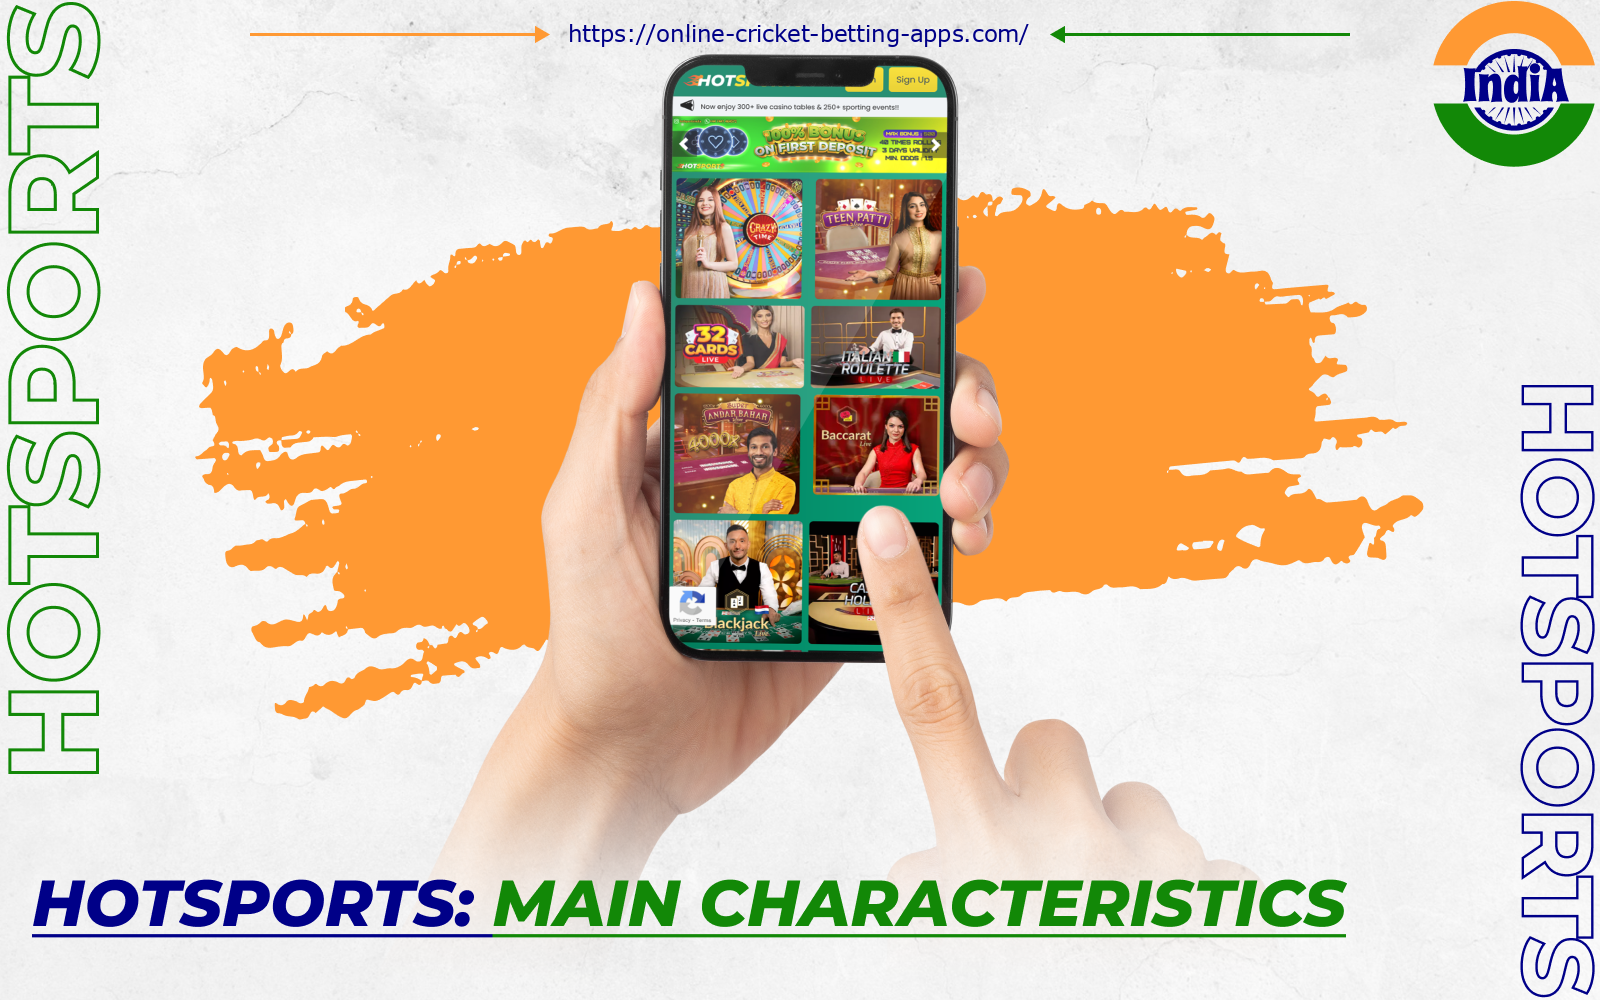 The HotSports app is small in size but still gives Indians full access to the bookmaker's gambling games